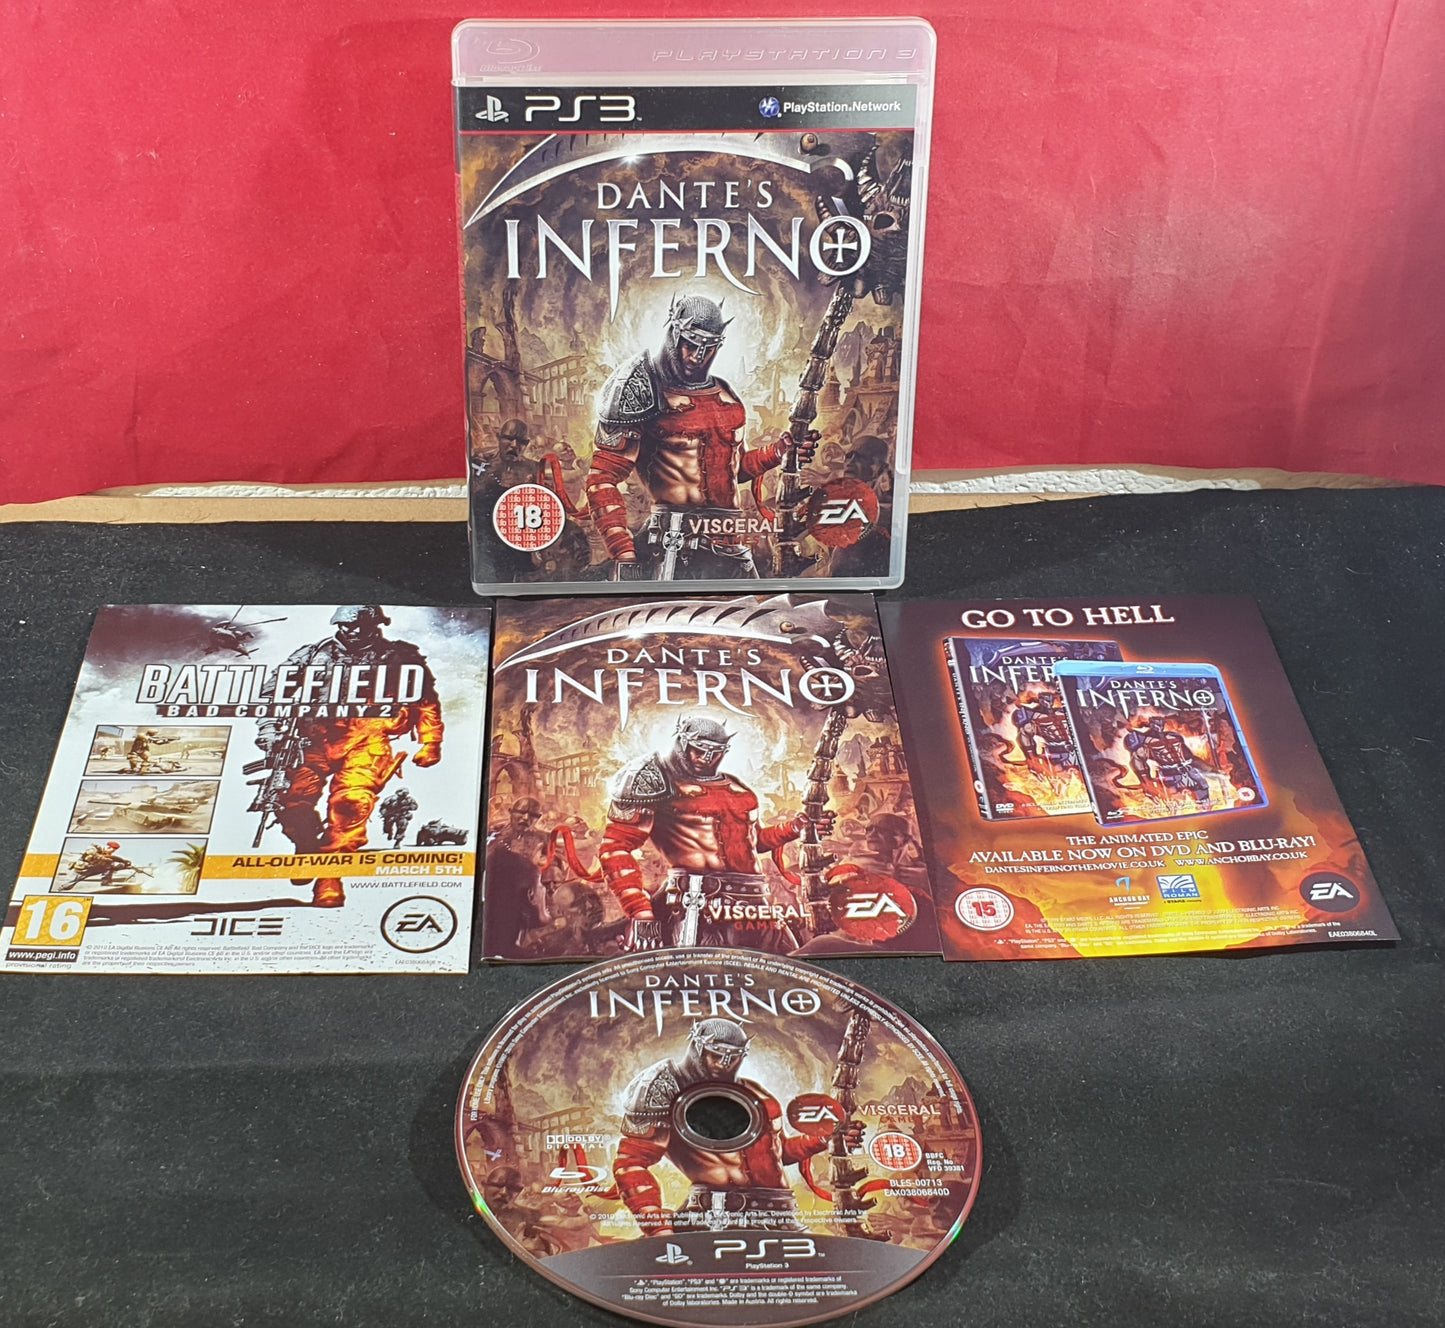 Dante's Inferno Sony Playstation 3 (PS3) Game